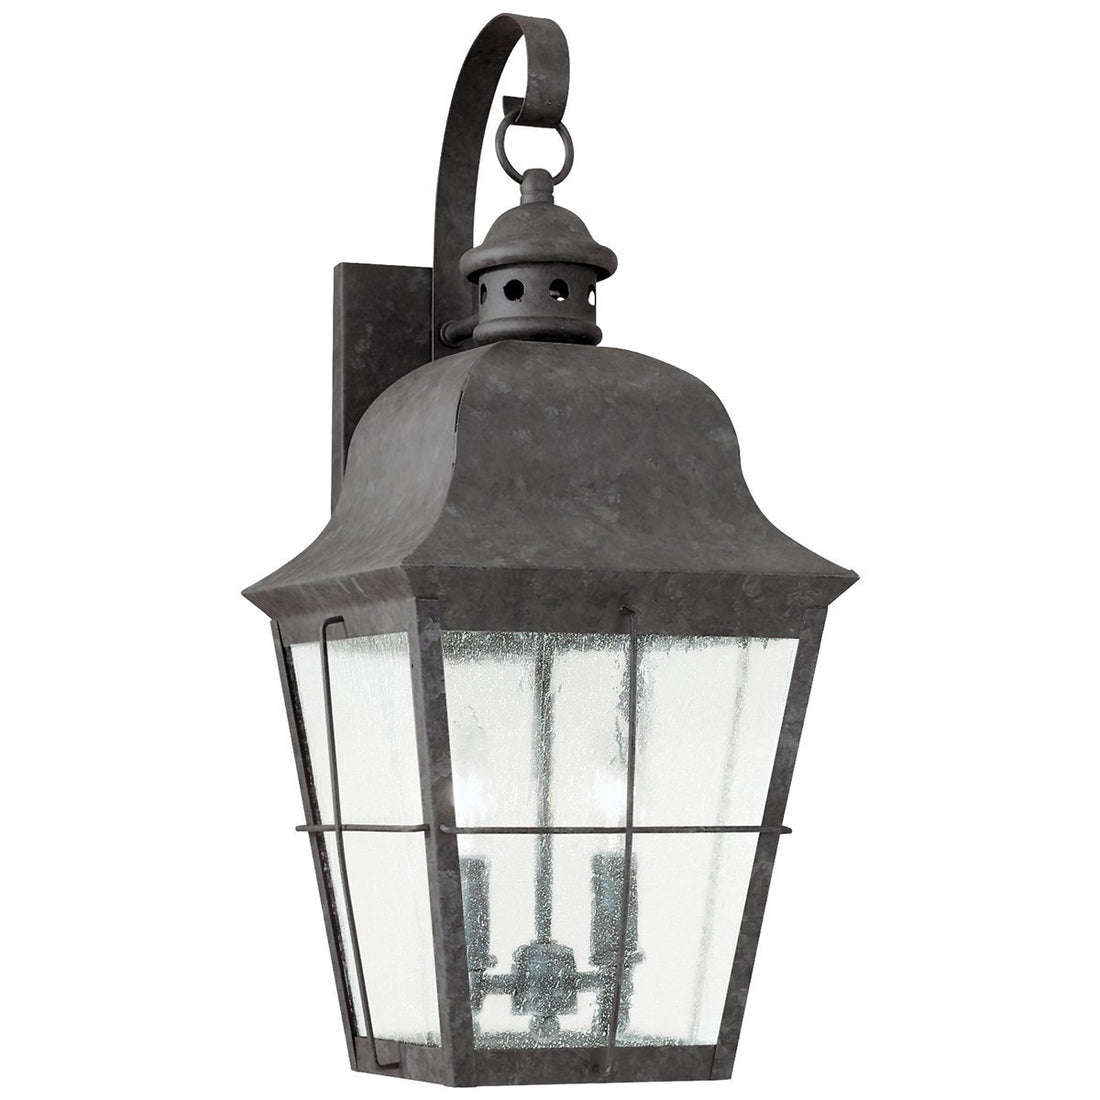 Sea Gull Lighting Chatham Traditional Two Light Outdoor Wall Lantern